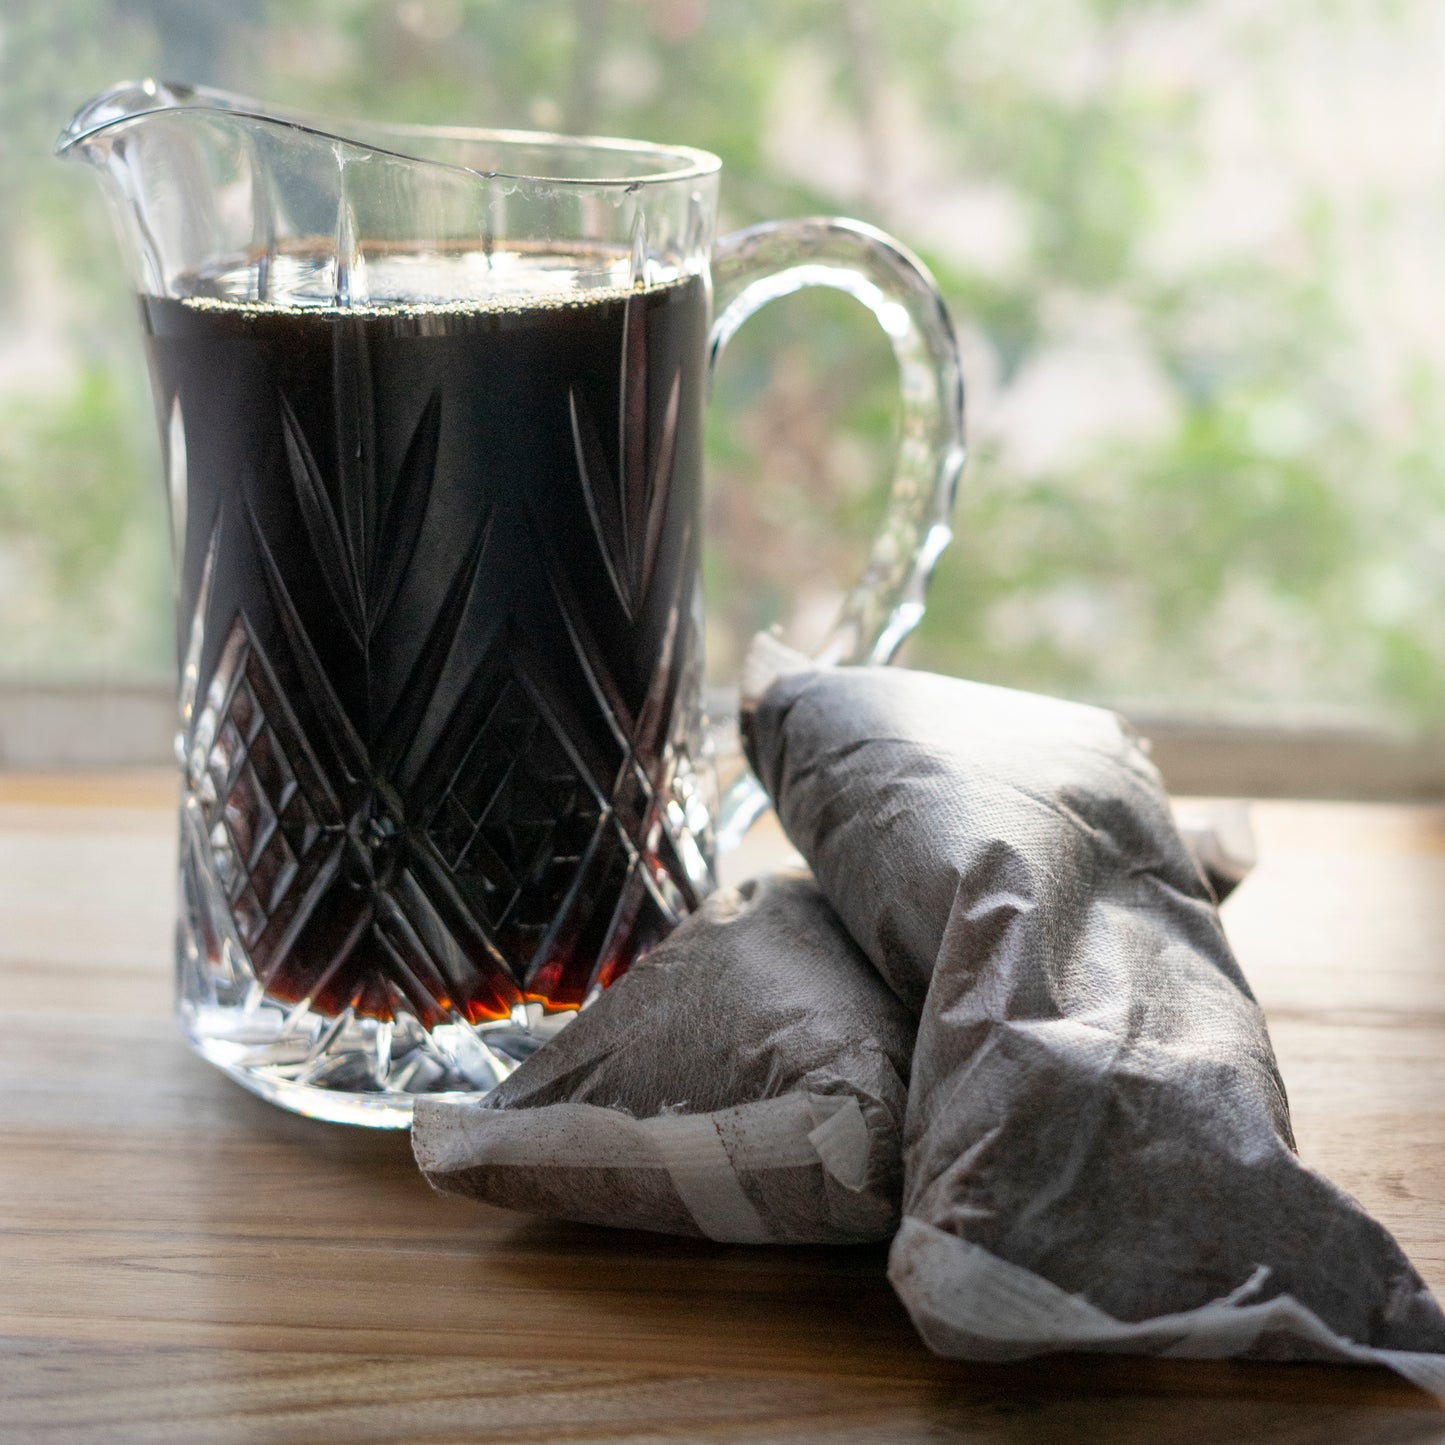 Cold Brew Coffee Sachets